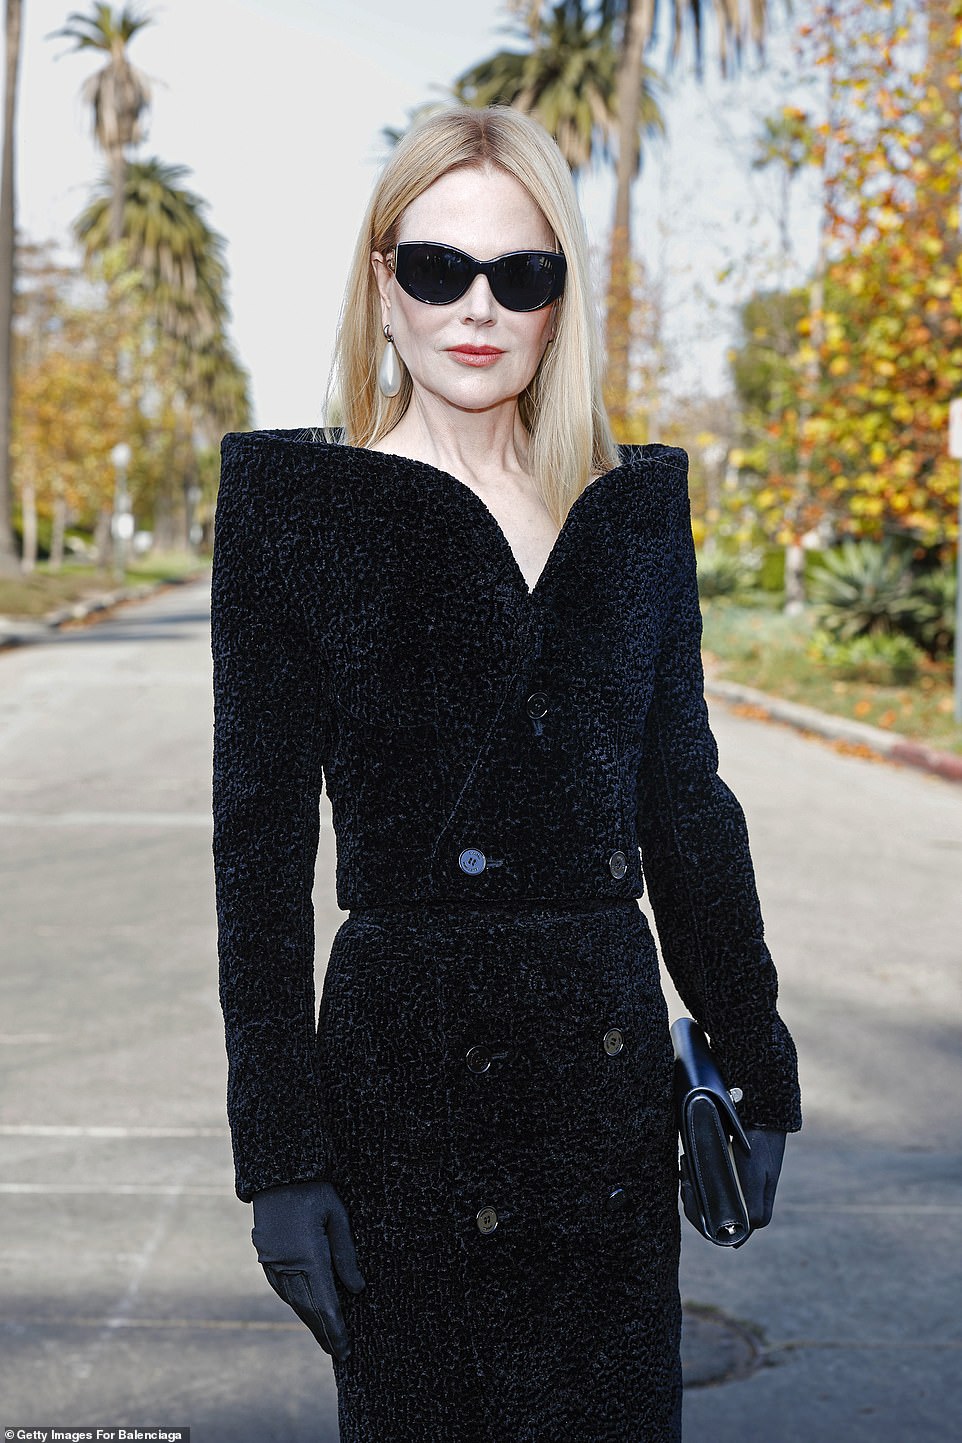 Nicole added further glam to her look with a large pearl earring, black gloves, and sunglasses